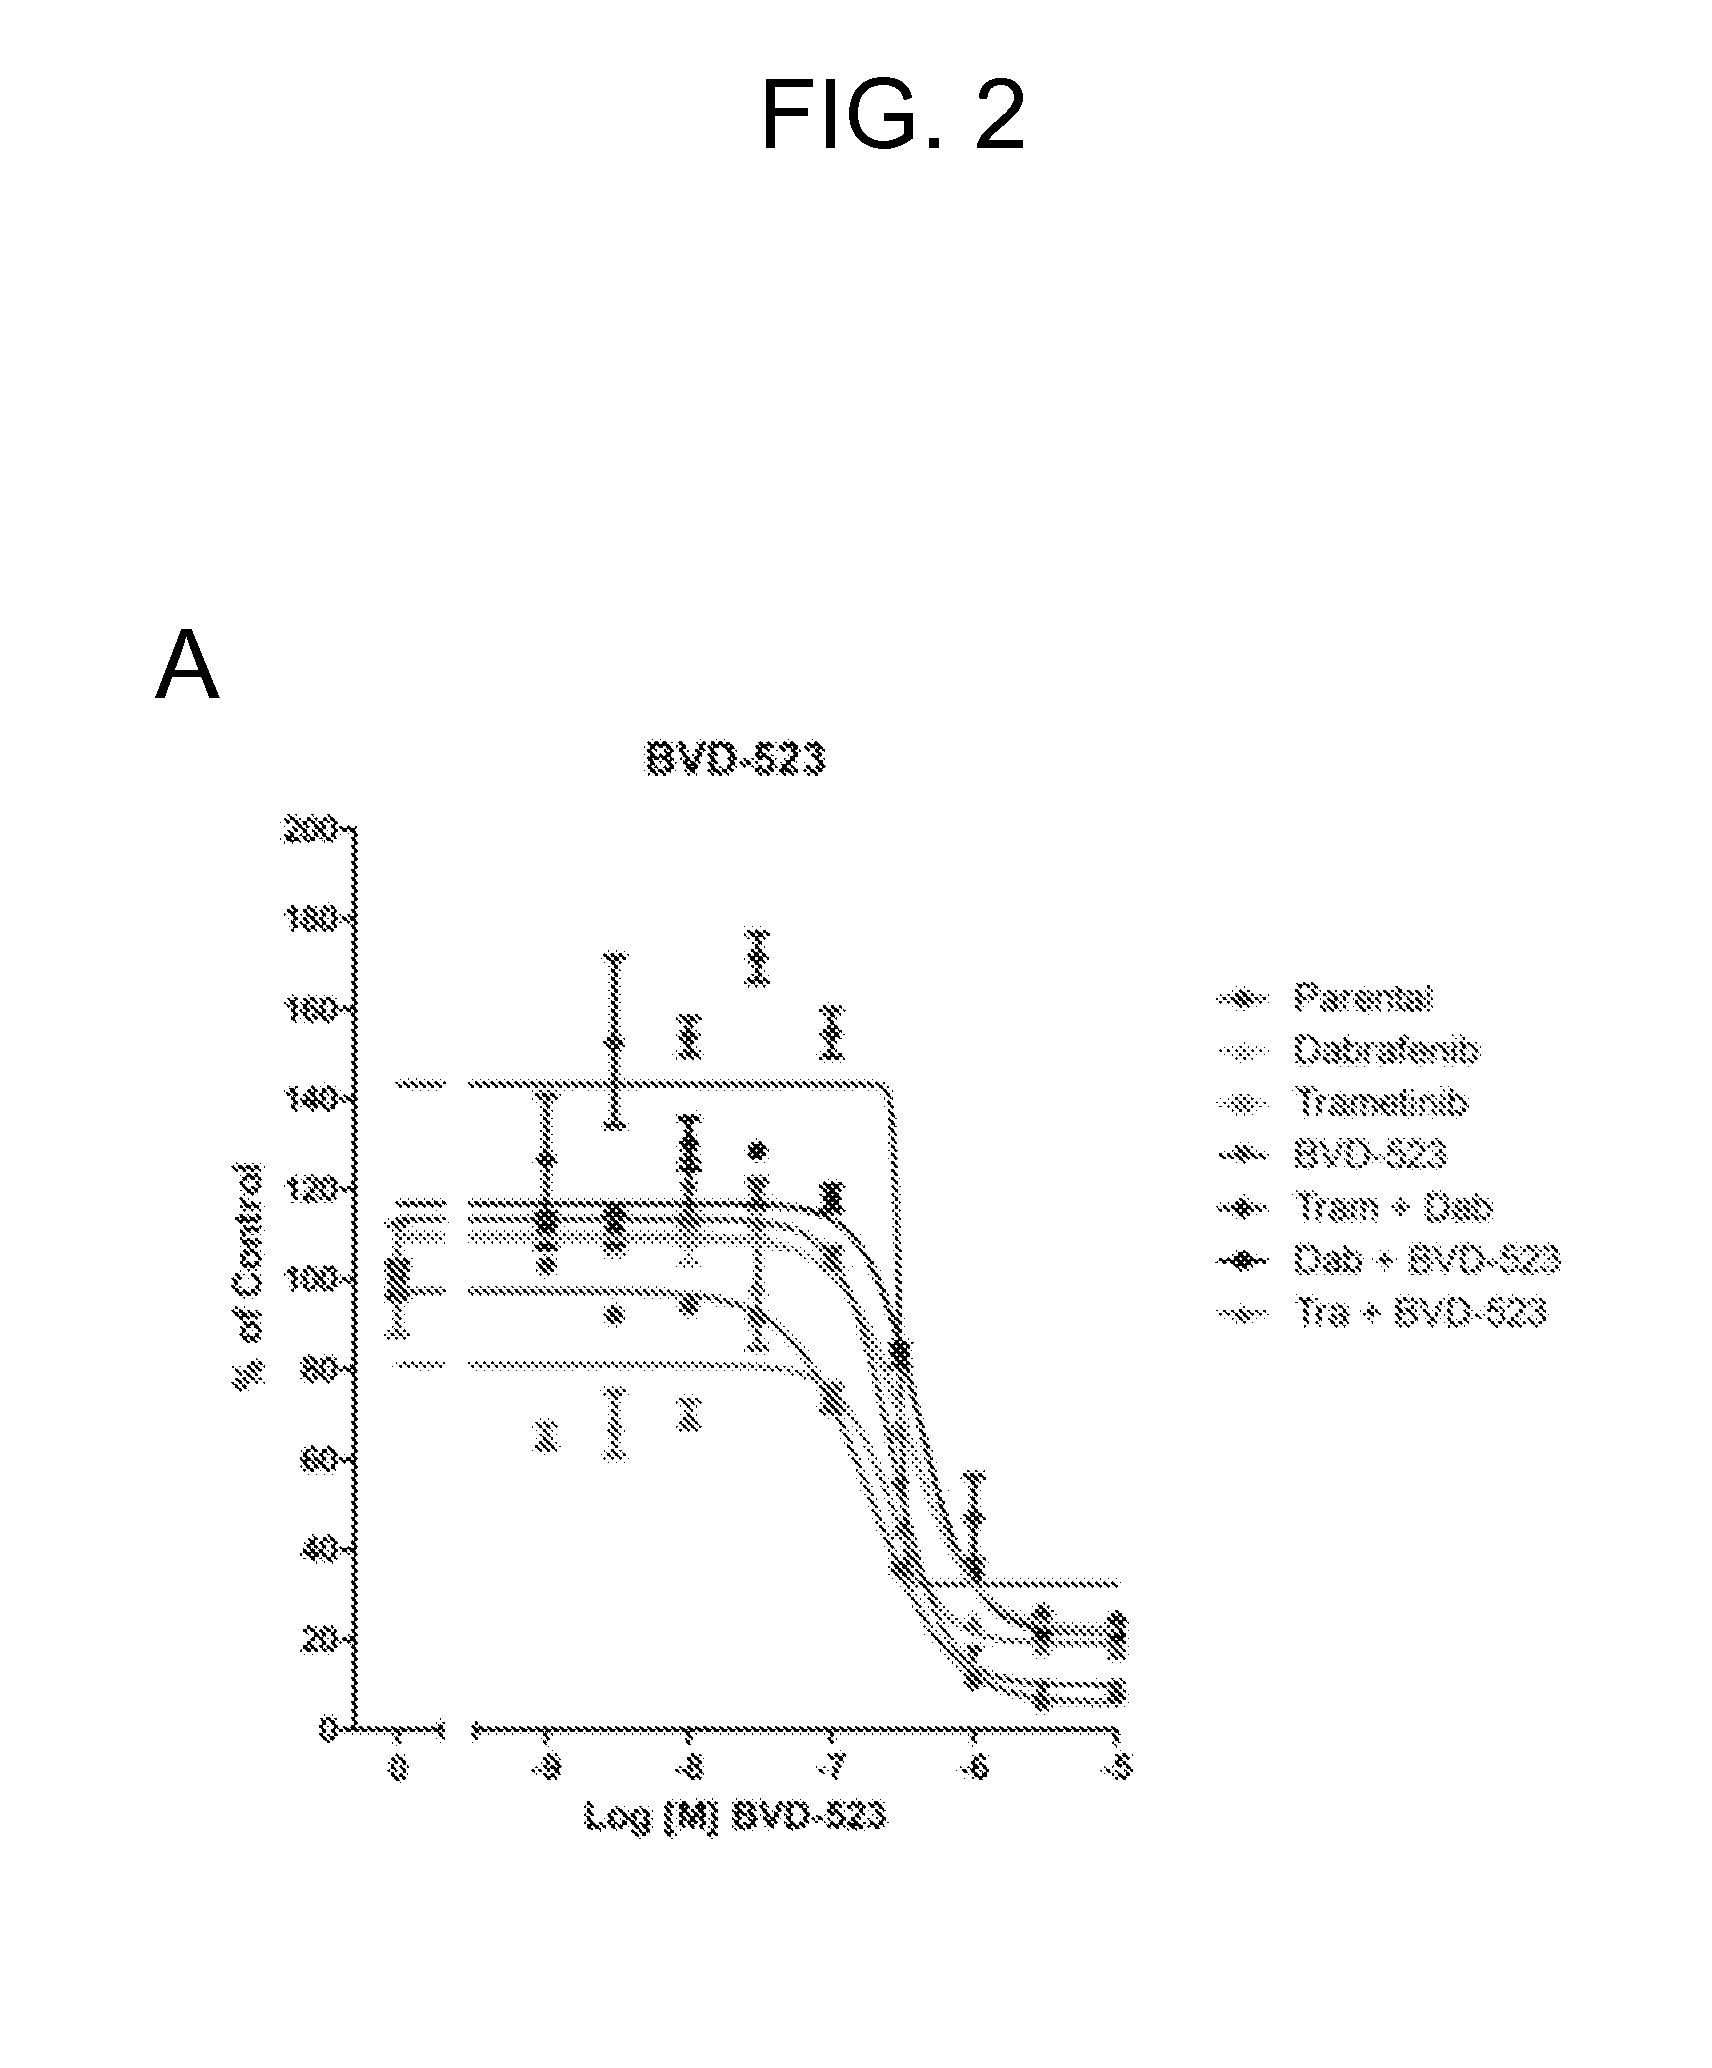 Cancer treatments using combinations of type 2 mek and erk inhibitors